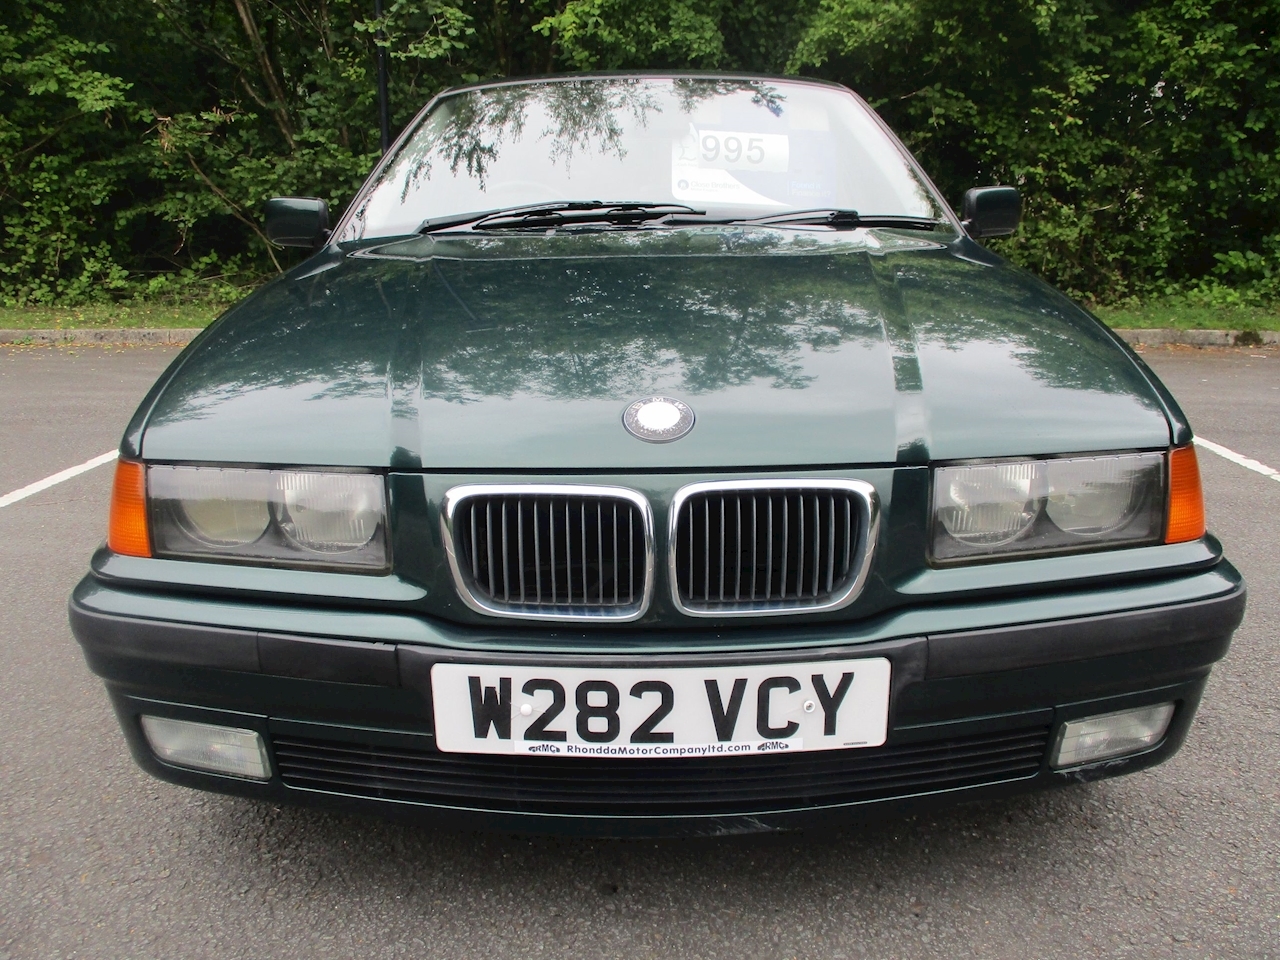 Used 2000 BMW 3 Series E36 316i SE Compact M43 1.9 For